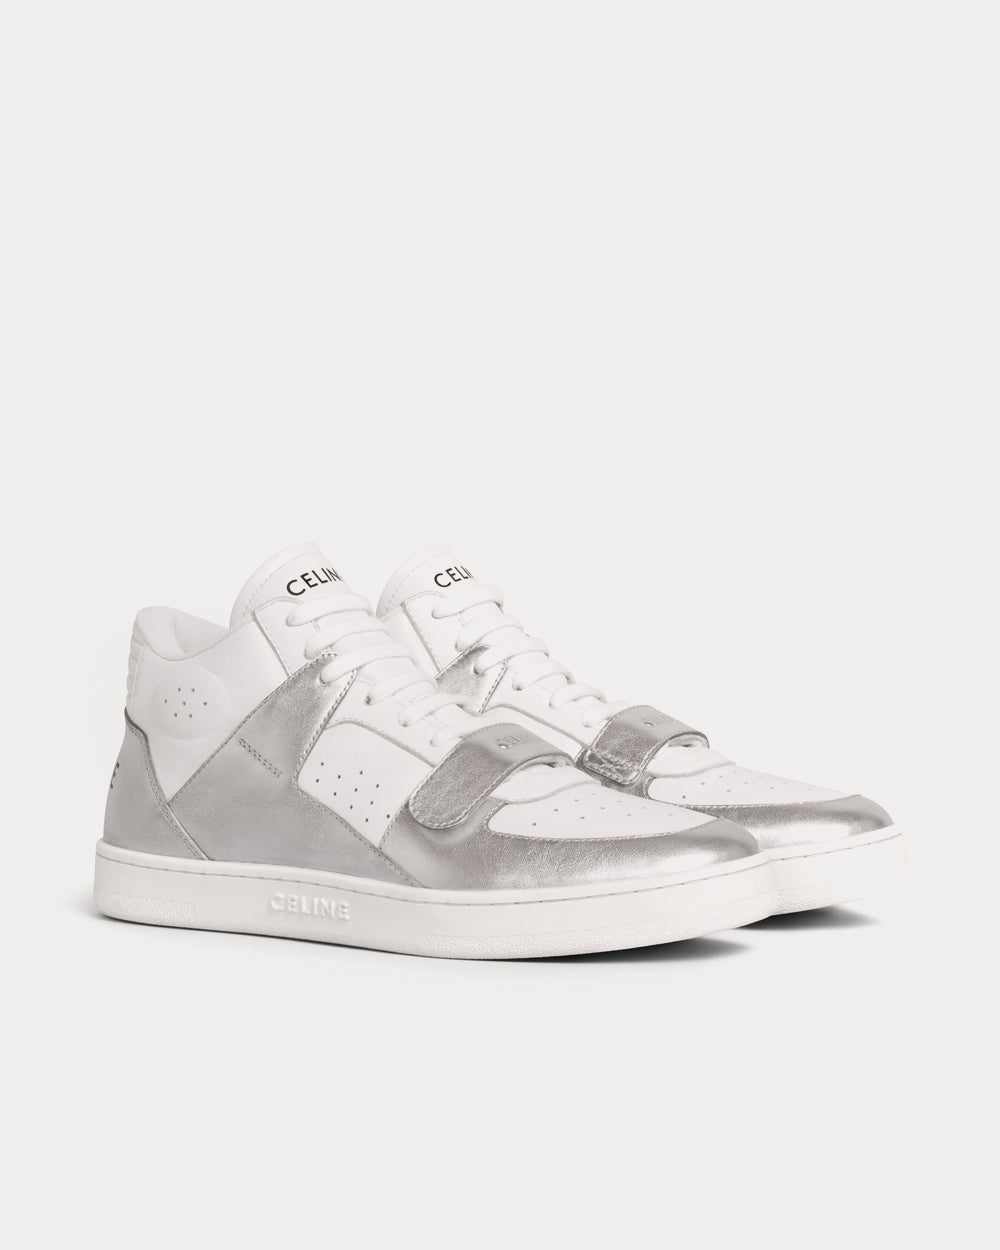 Celine - CT-02 Mid With Scratch In Calfskin Optic White / Silver High Top Sneakers